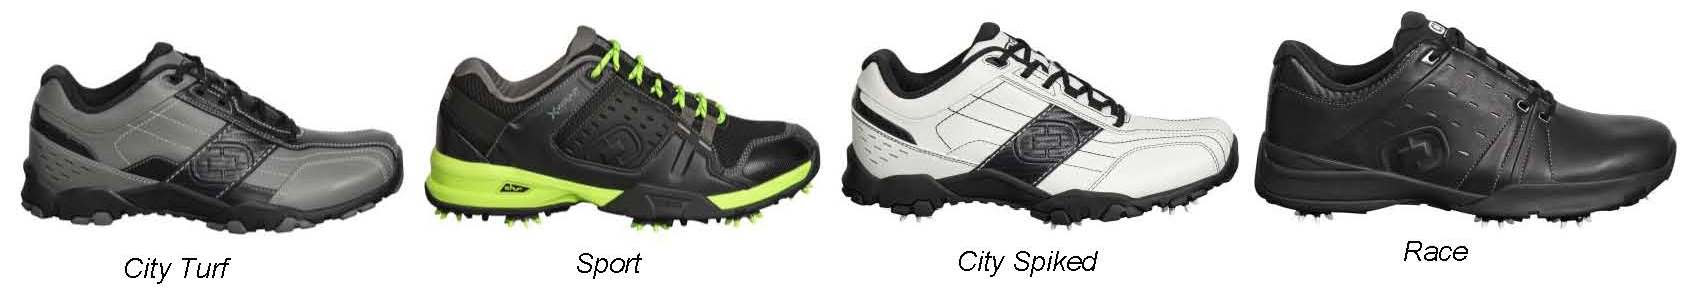 OGIO Puts Best Foot Forward with New Golf Shoe Collections